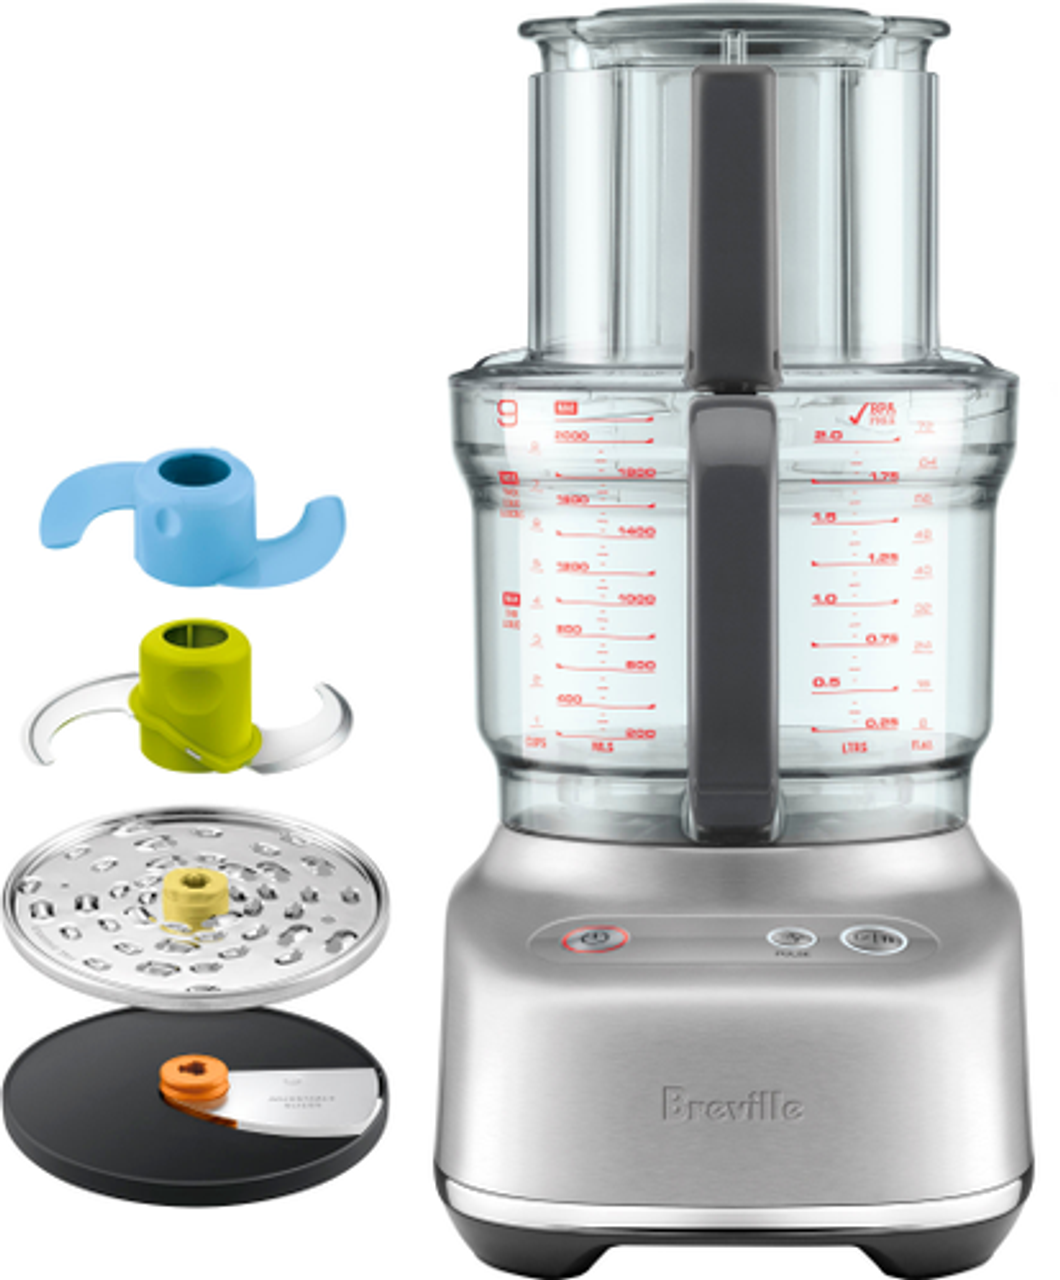 Breville - the Sous Chef 9-Cup Food Processor - Brushed Stainless Steel